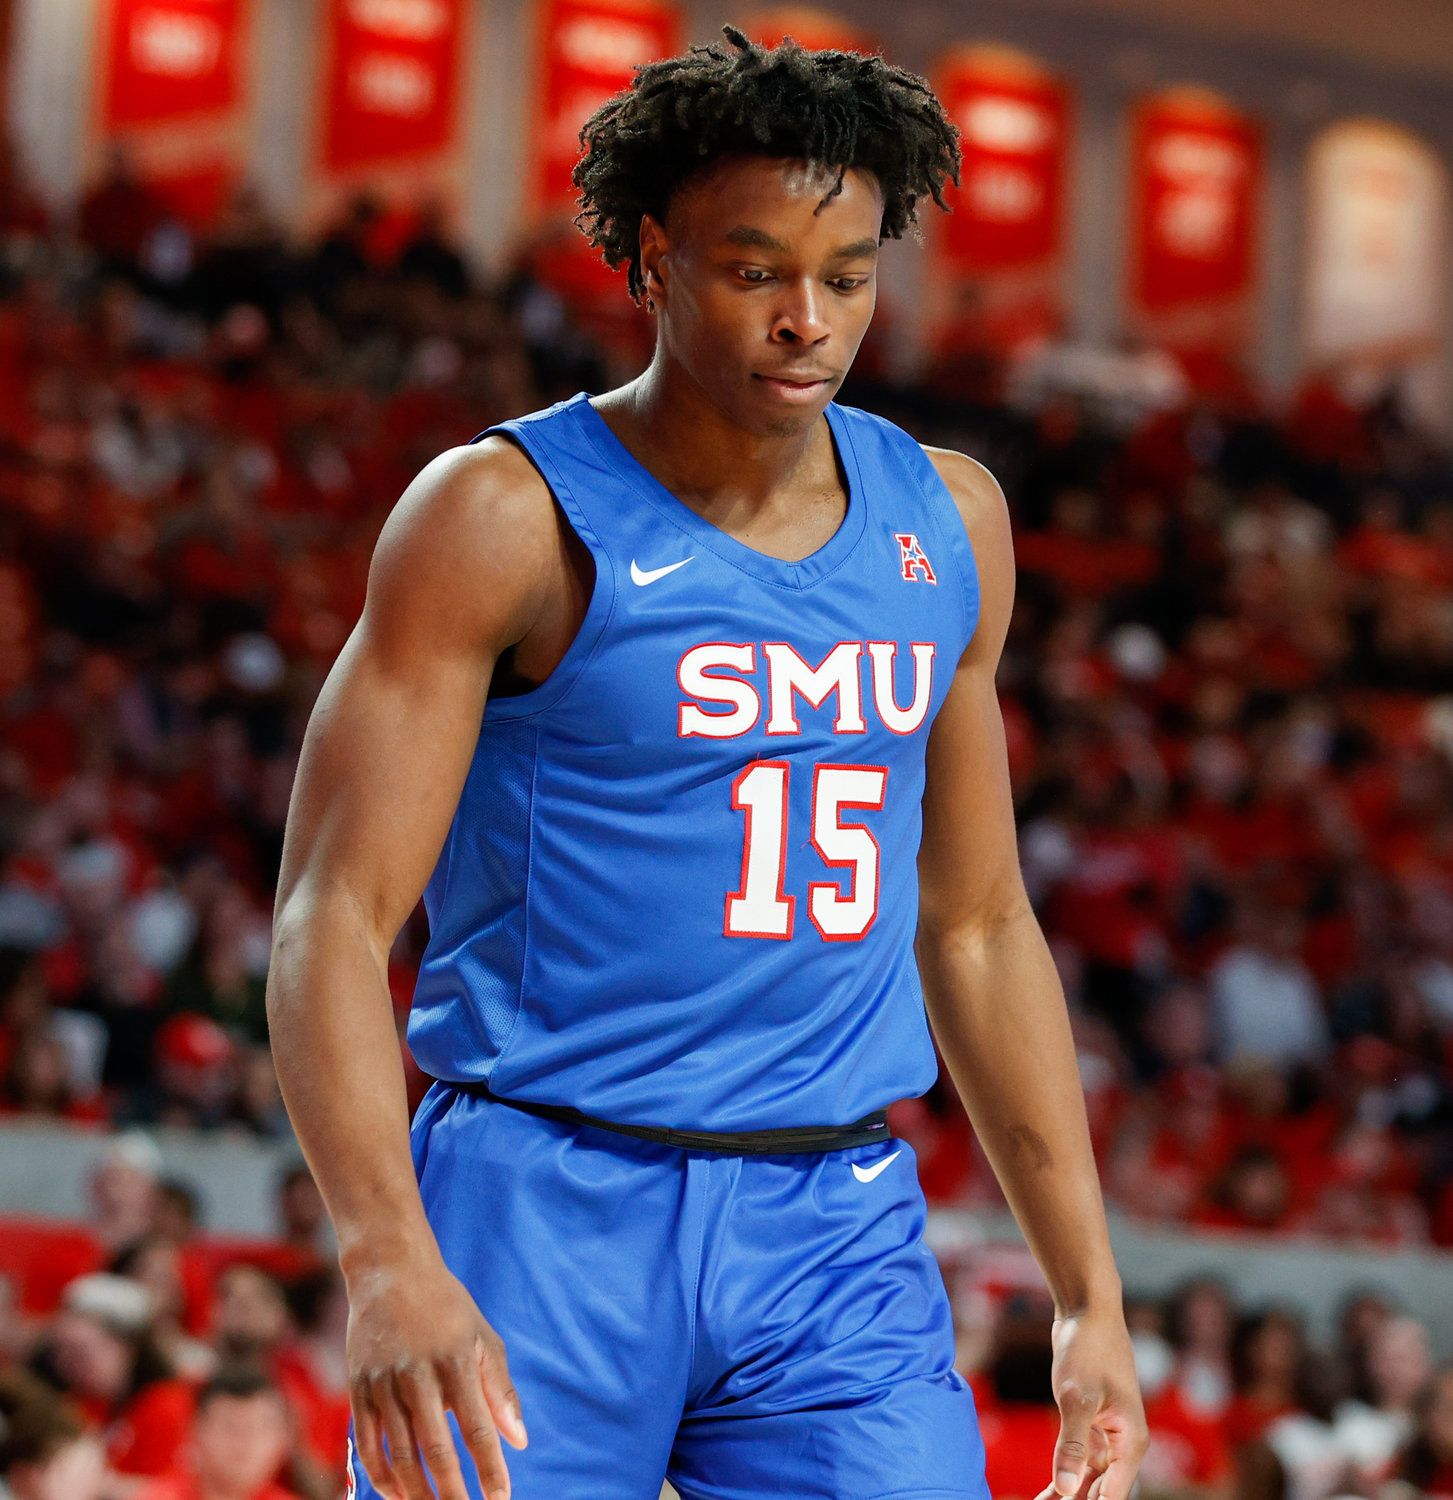 SMU guard Darius McBride (15) during an NCAA men’s basketball game between the Houston Cougars and the Southern Methodist Mustangs on Jan. 5, 2023 in Houston. Houston won, 87-53,